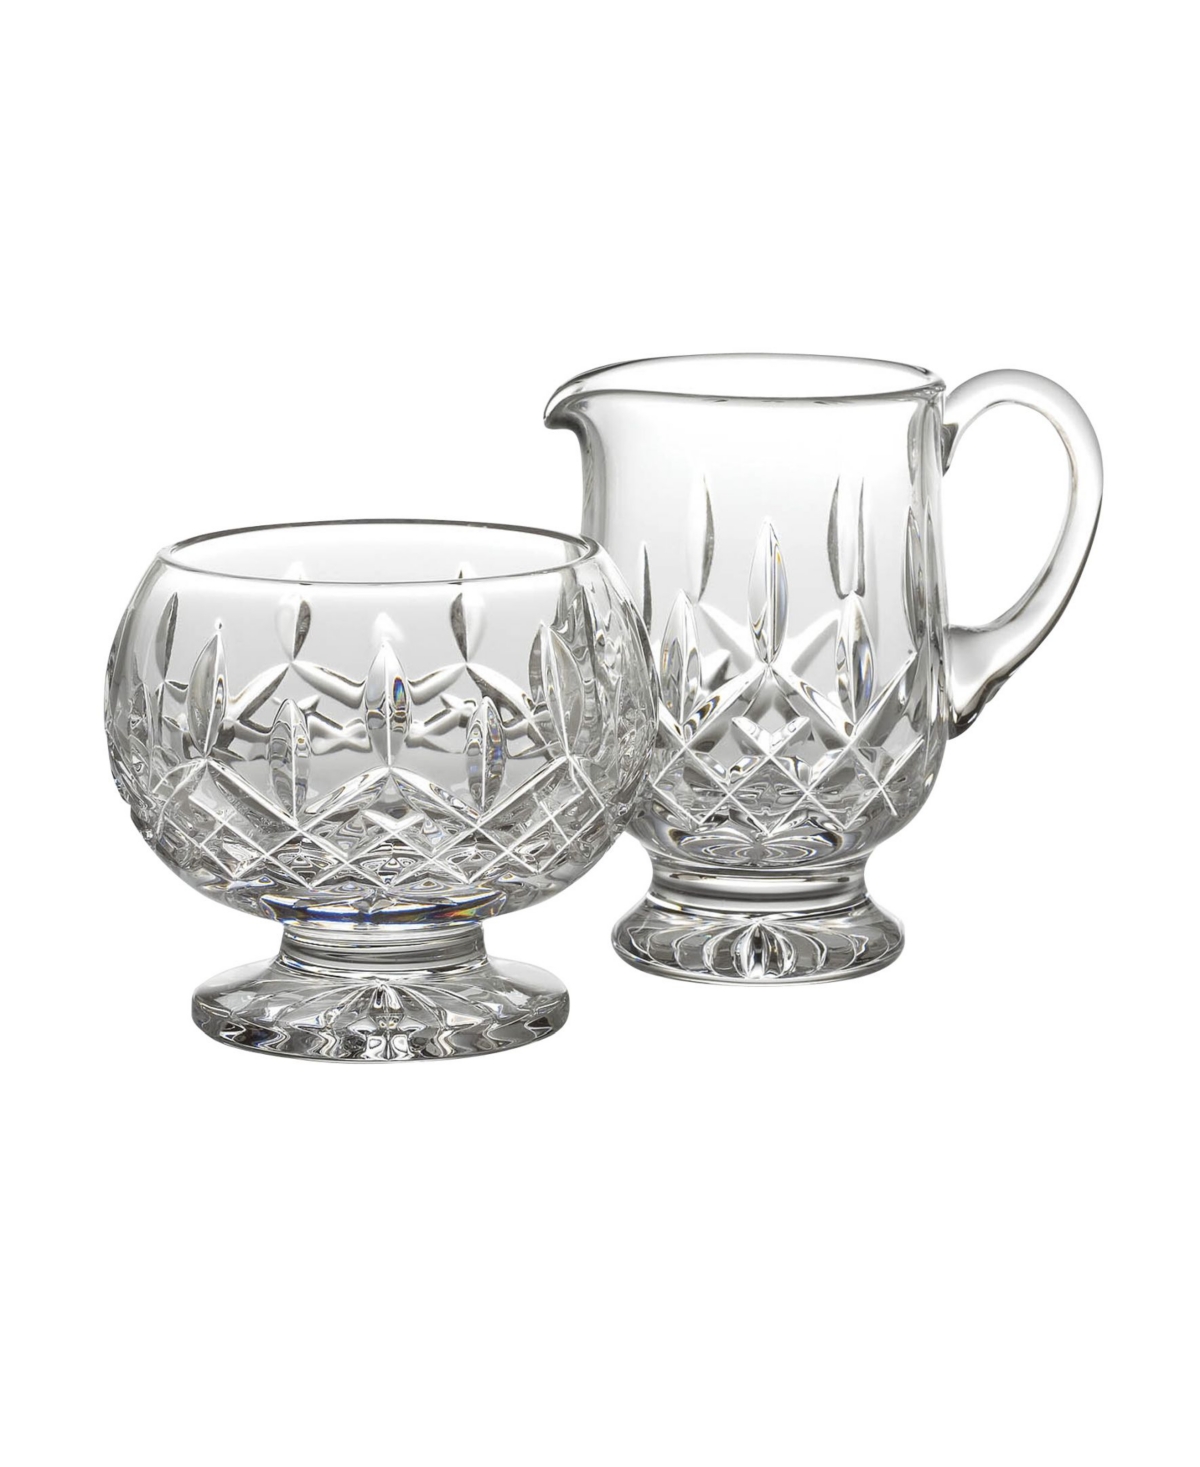 Waterford Lismore Footed Creamer And Sugar Bowl Set In Clear